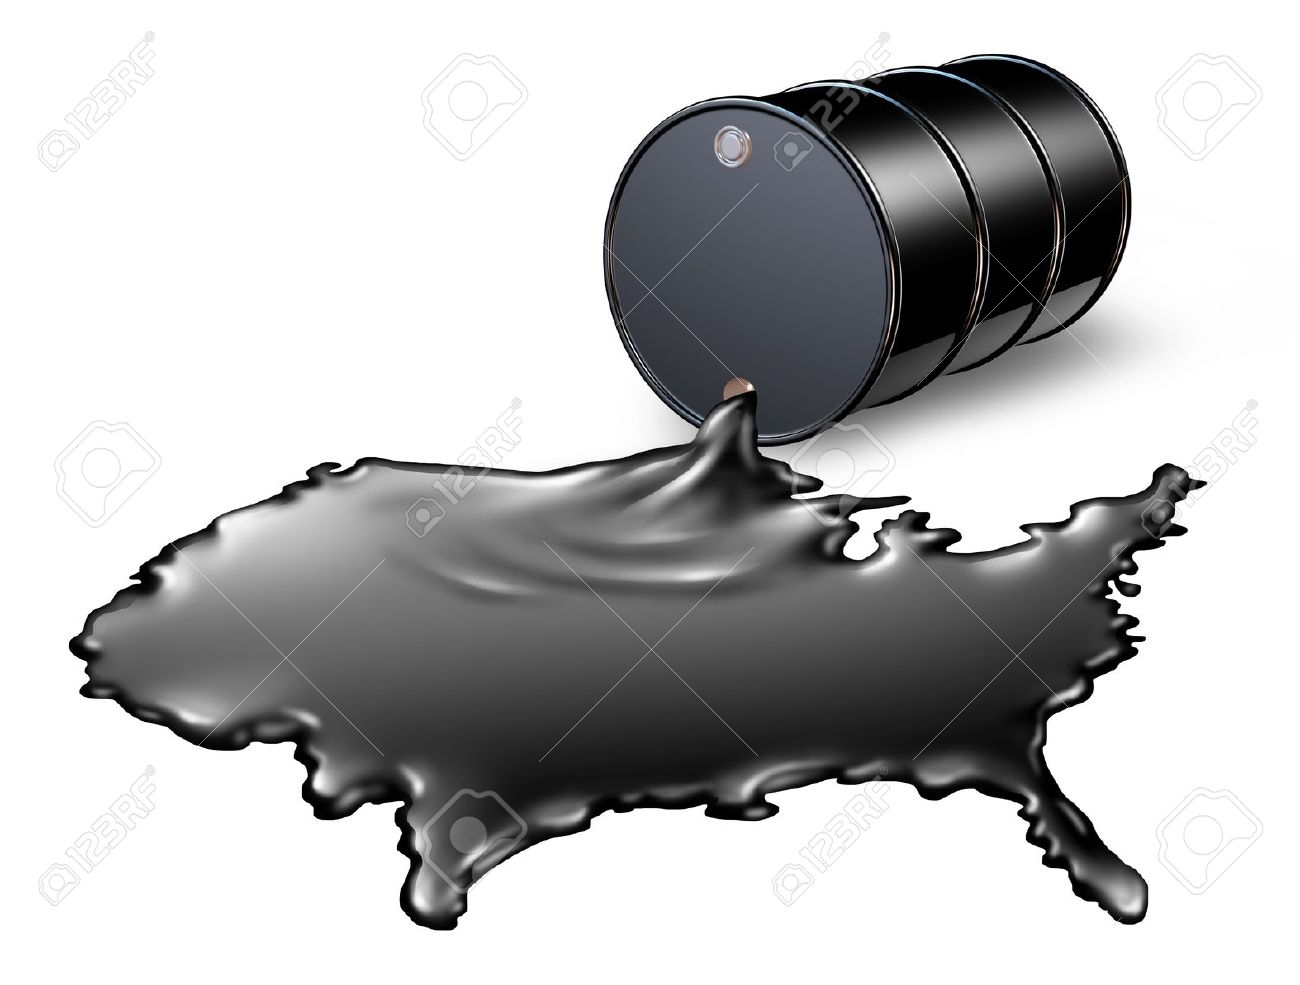 Oil industry pumped cash into Capitol lobbying campaign